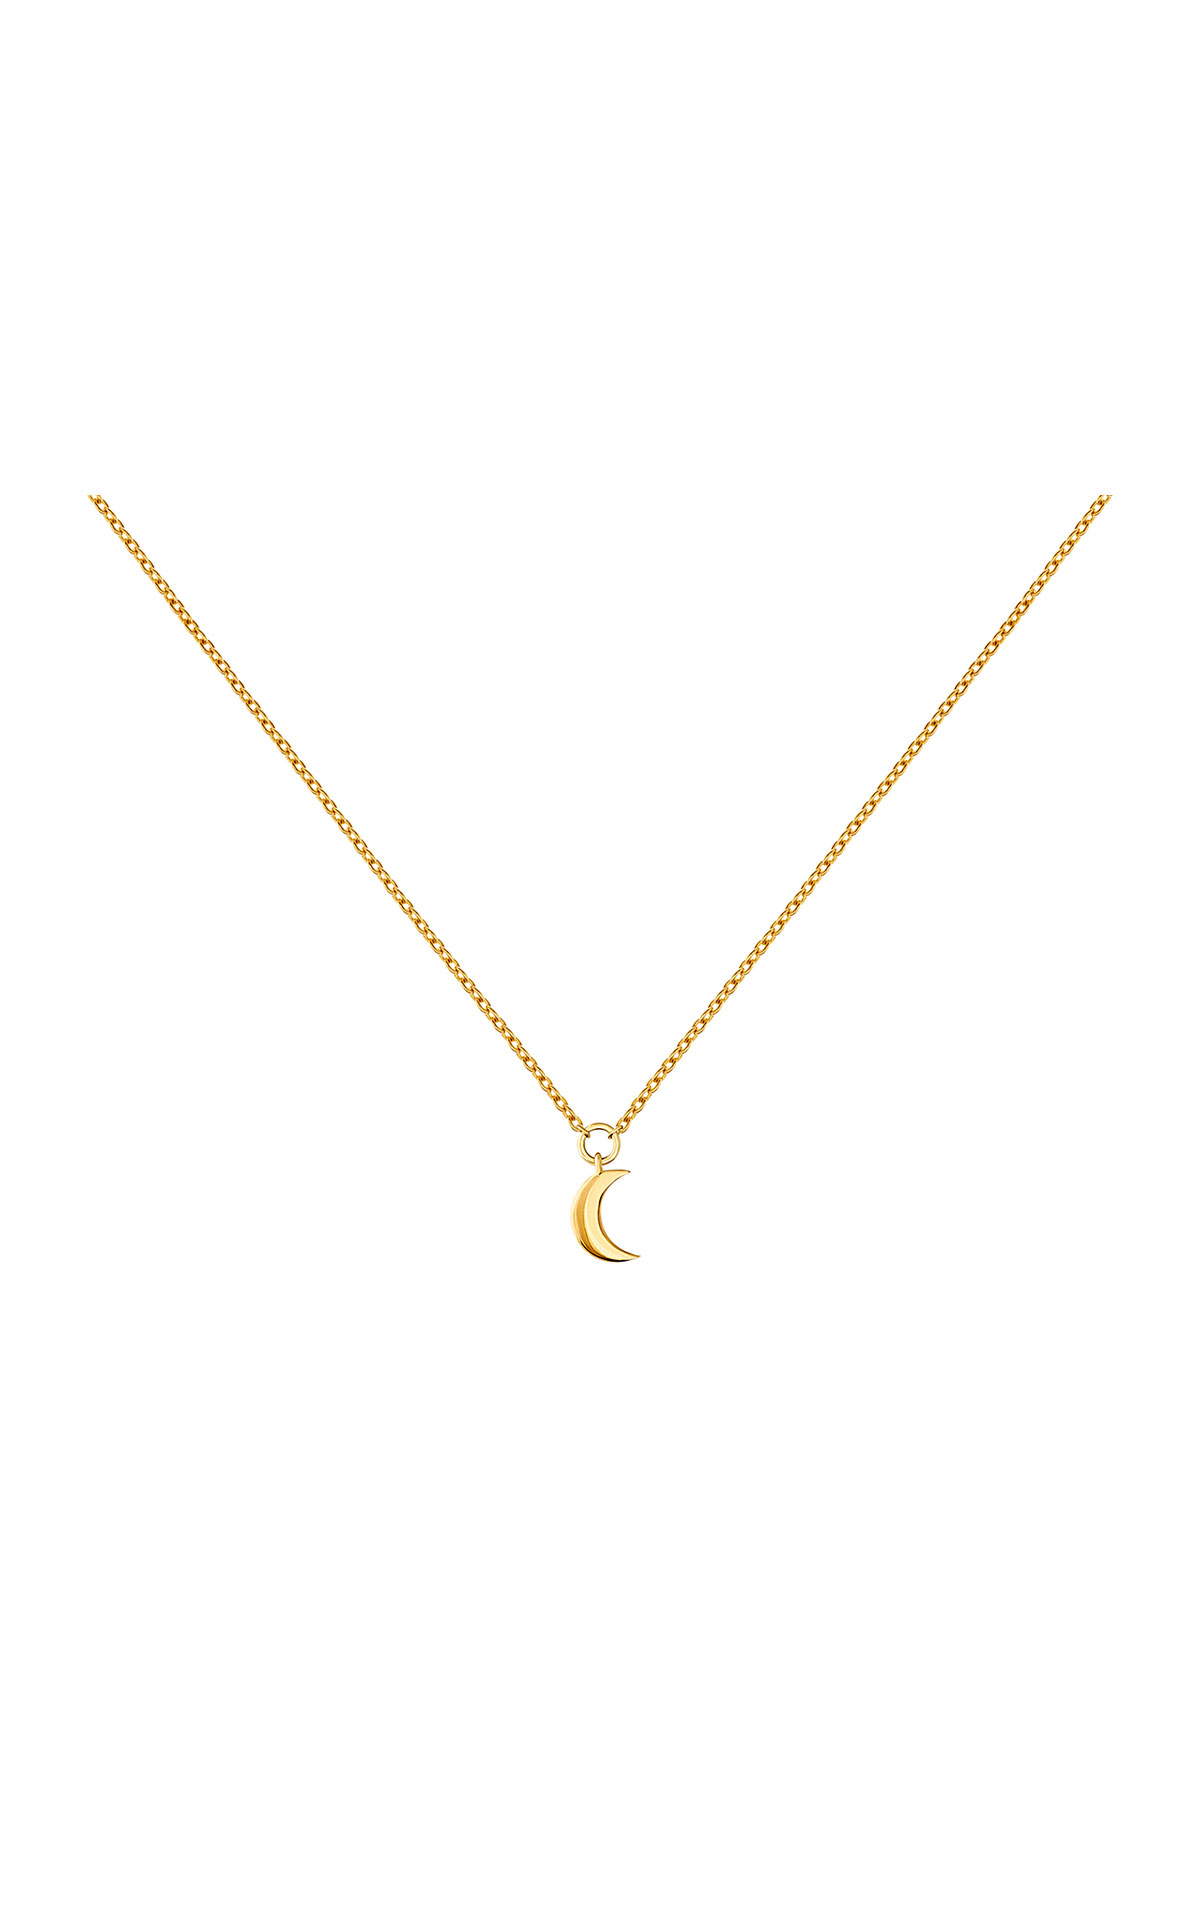 Gold necklace with moon